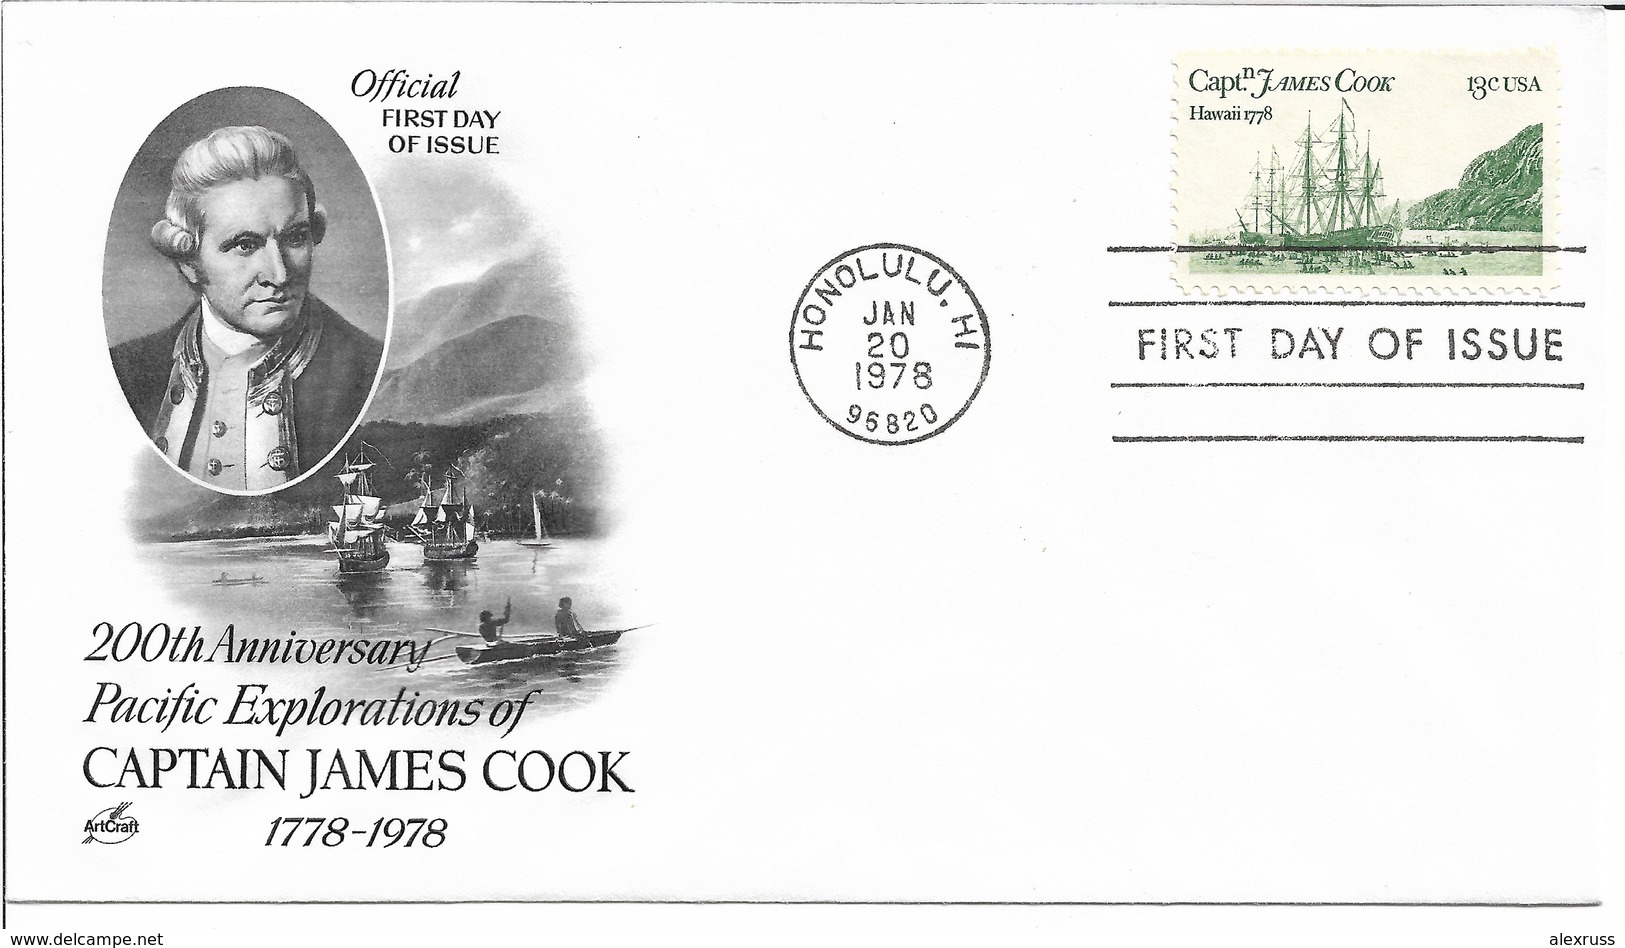 US 1978 FDC Cachet,Cap. James Cook & Ships,VF-XF !! (RS-2) - Ships